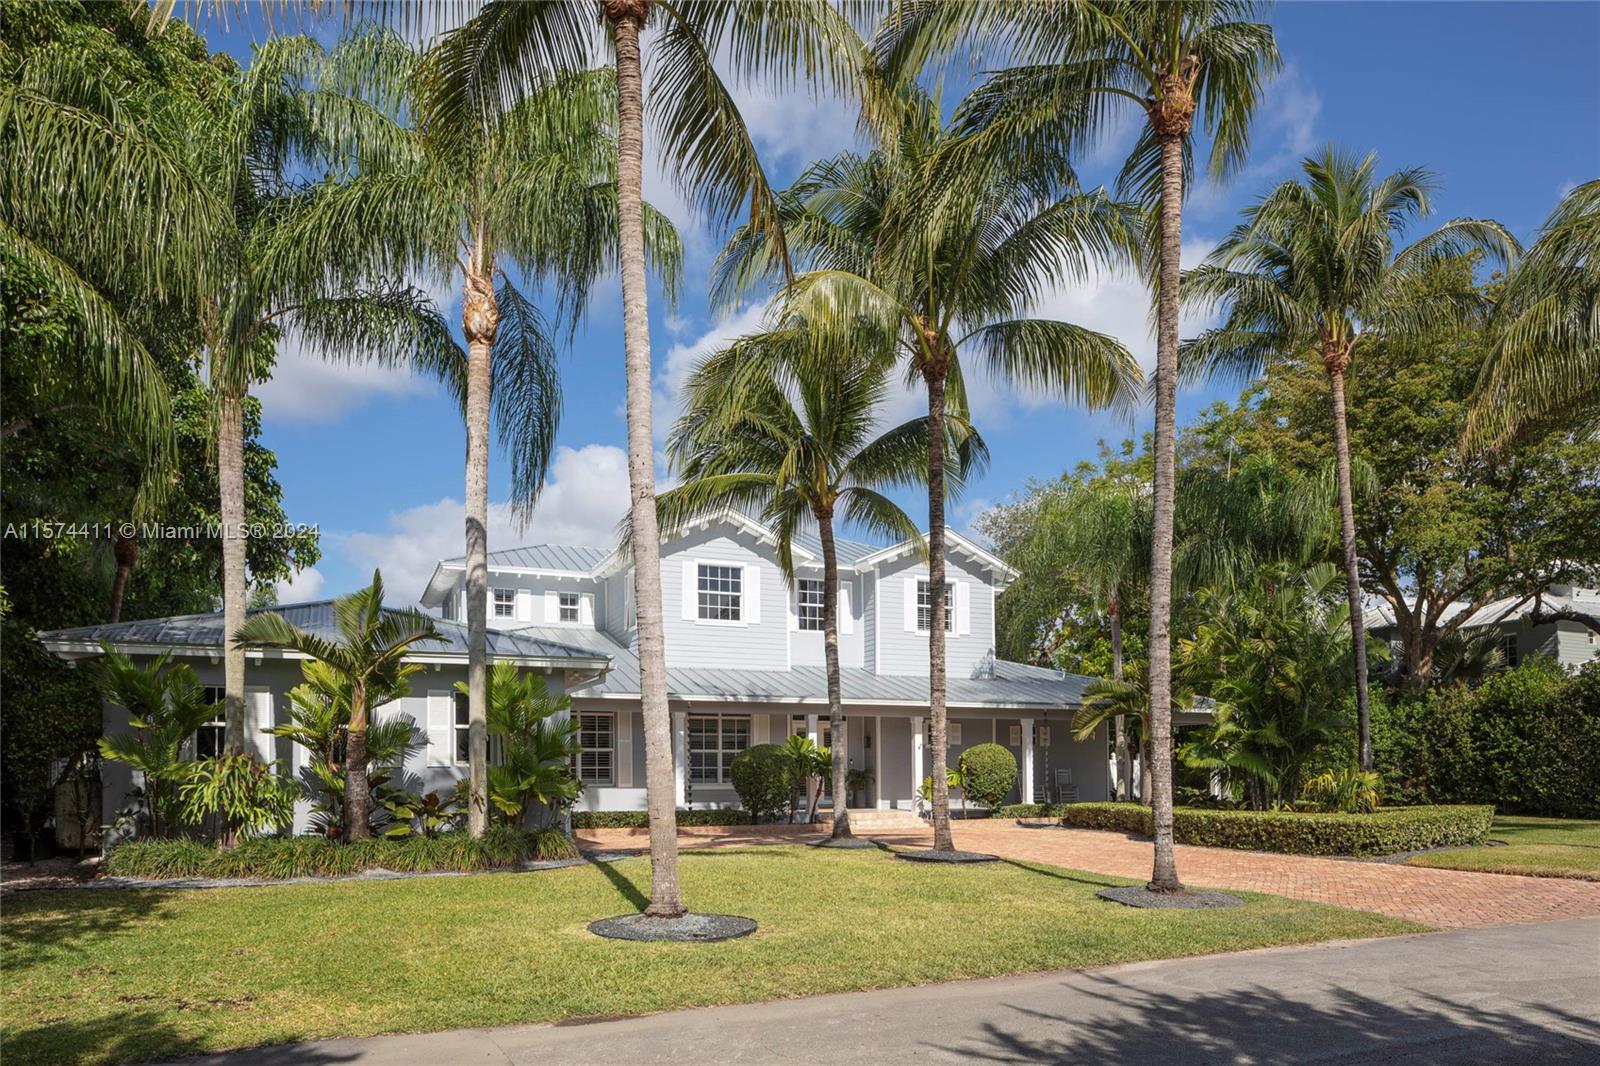 A special Key West estate on a beautiful canal-front block in the heart of Pinecrest. This home exud